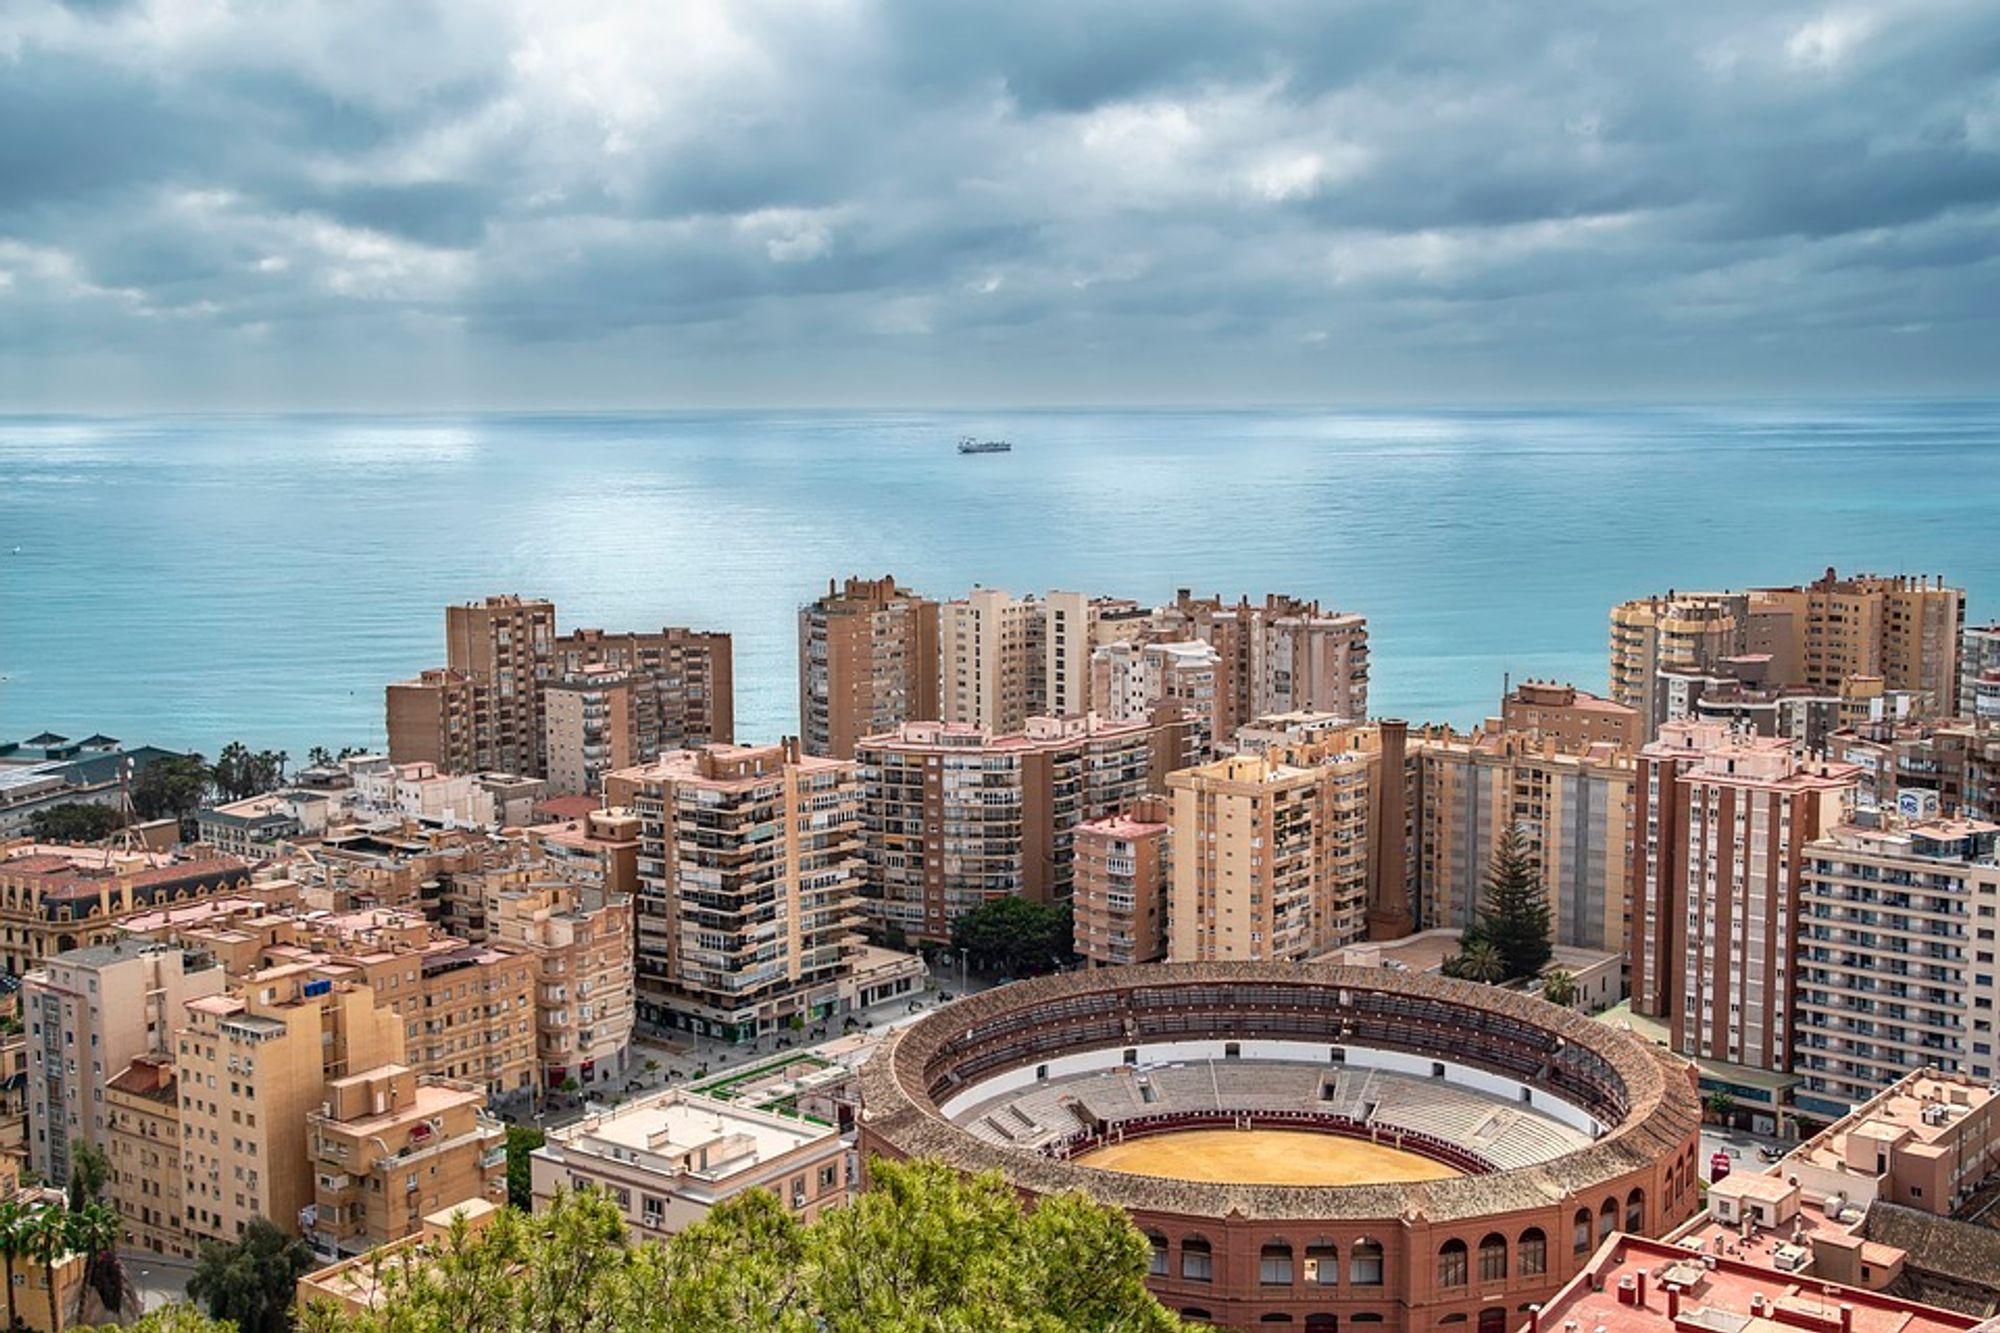 Essential experiences in Malaga, The Alcazaba and its amazing views